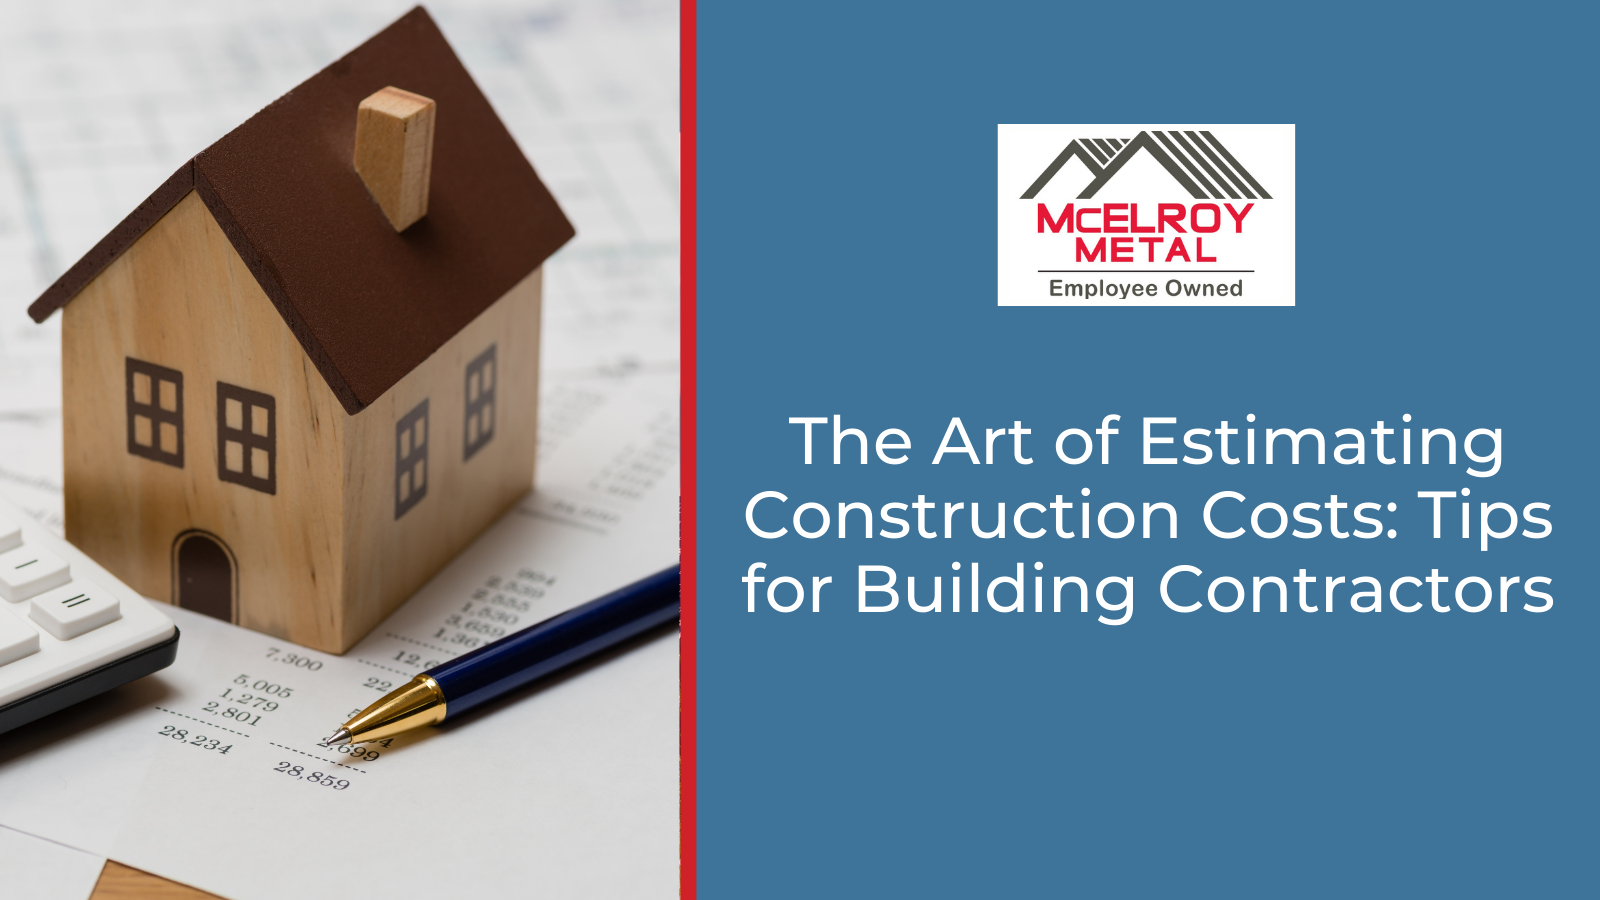 The Art of Estimating Construction Costs: Tips for Building Contractors